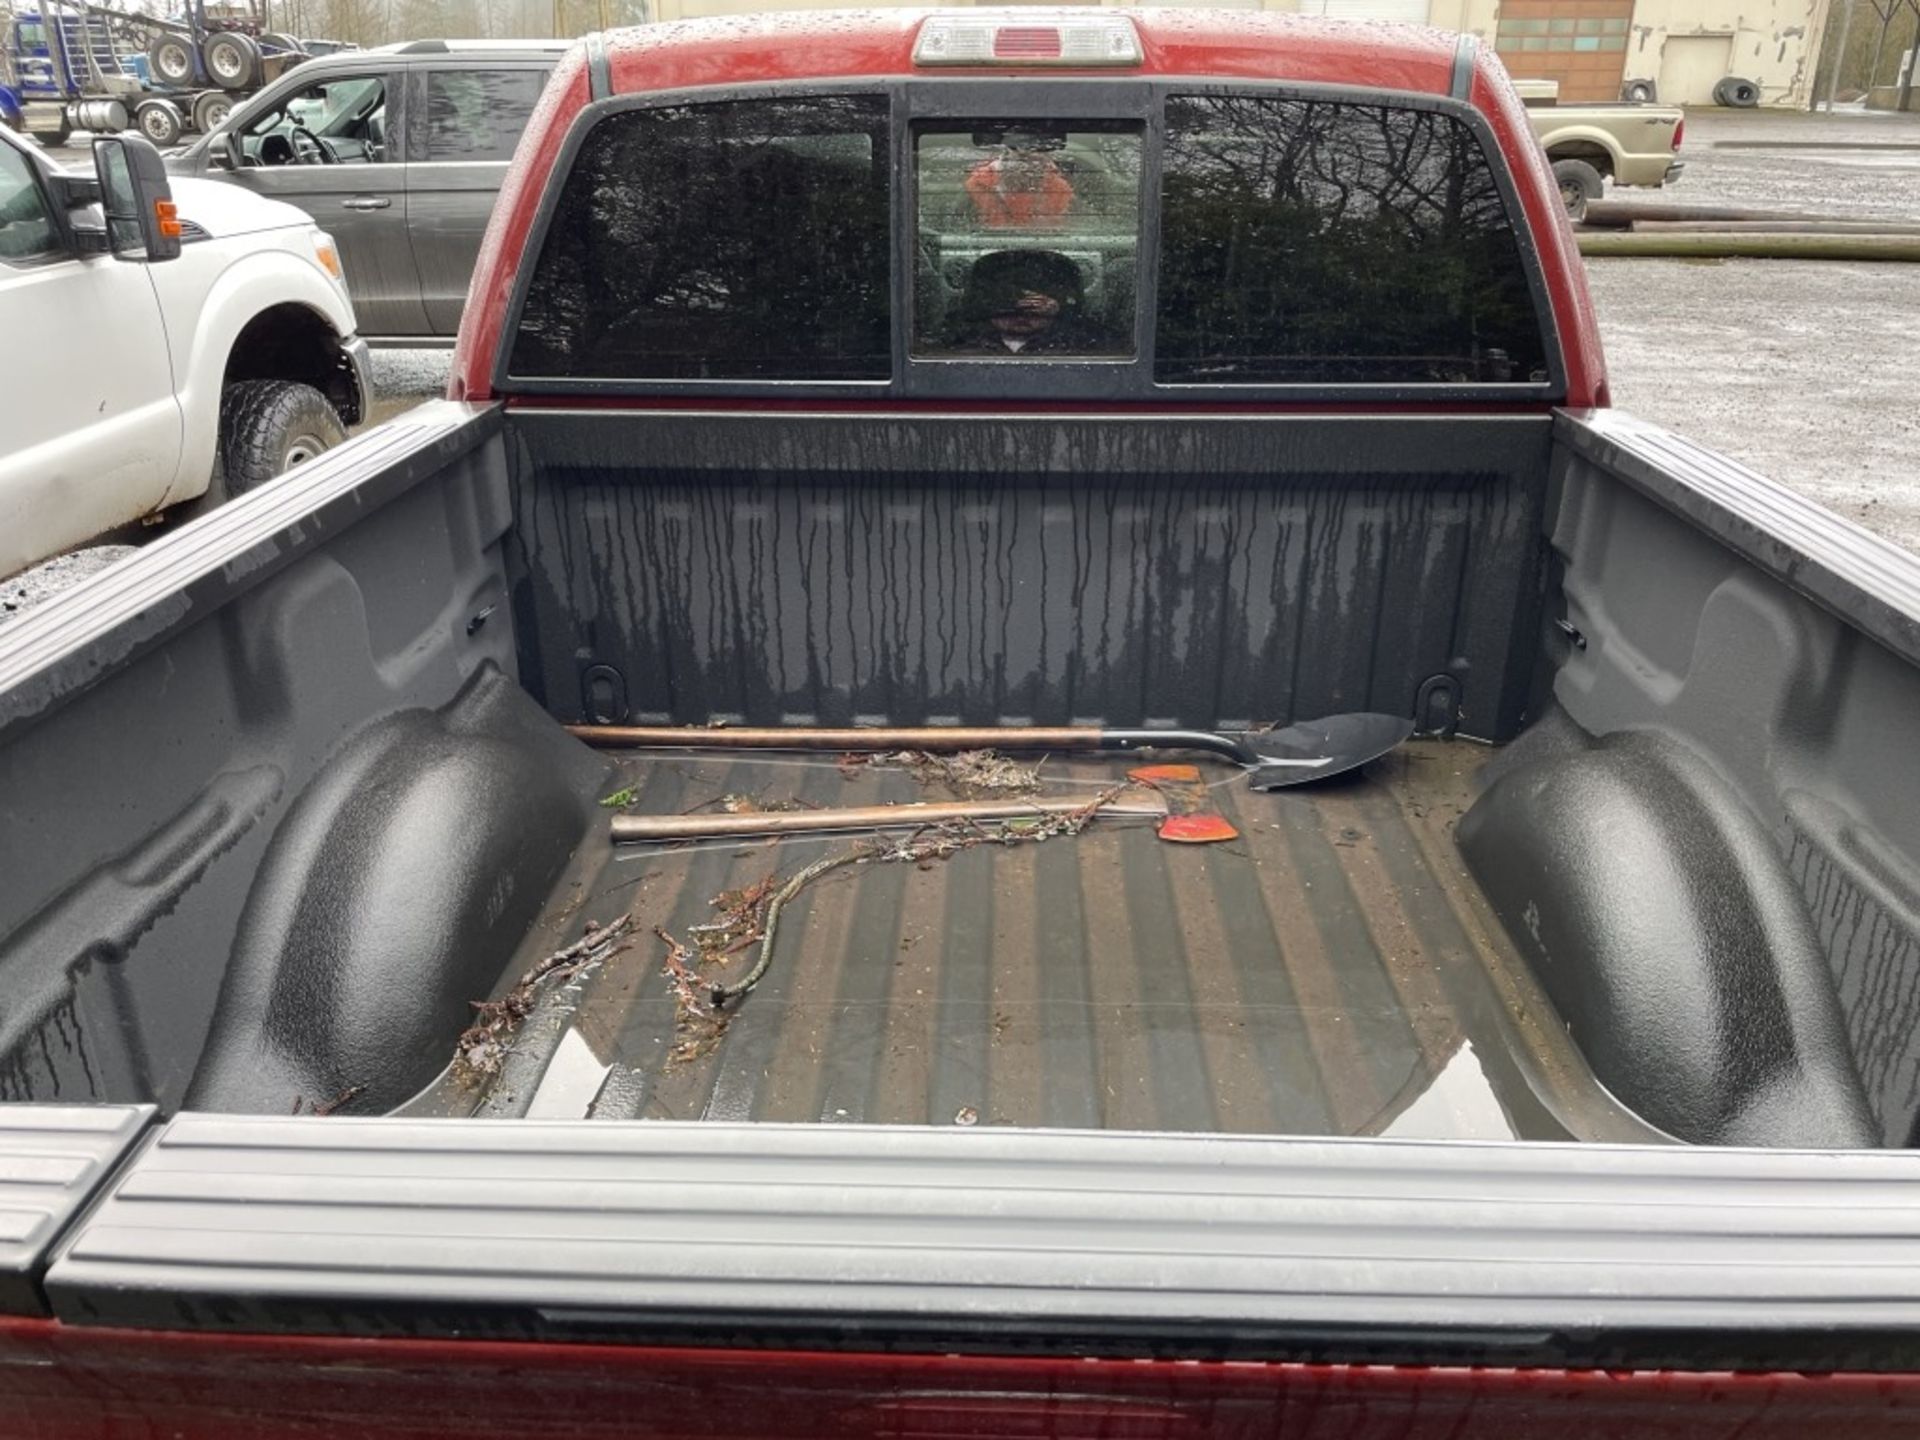 2014 Ford F150 Crew Cab Pickup - Image 5 of 17